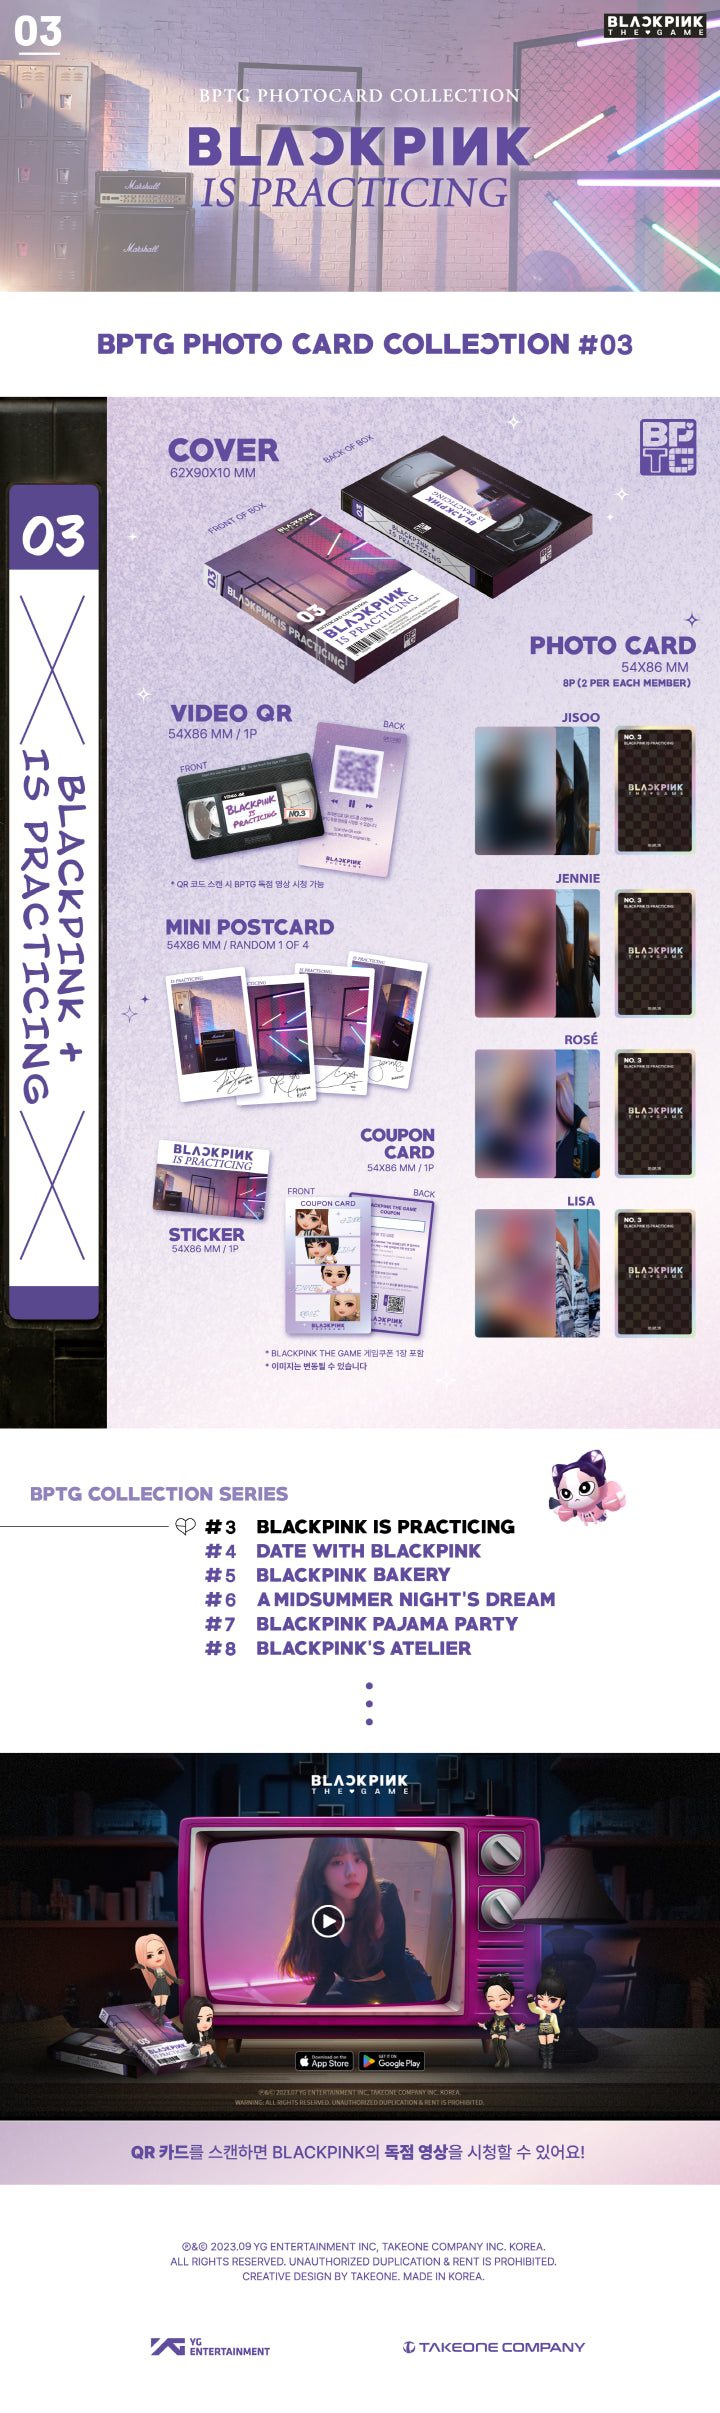 @ BLACKPINK THE GAME PHOTOCARD COLLECTION BLACKPINK THE GAME's 5-star photo card, which was only seen in-game, is now avai...